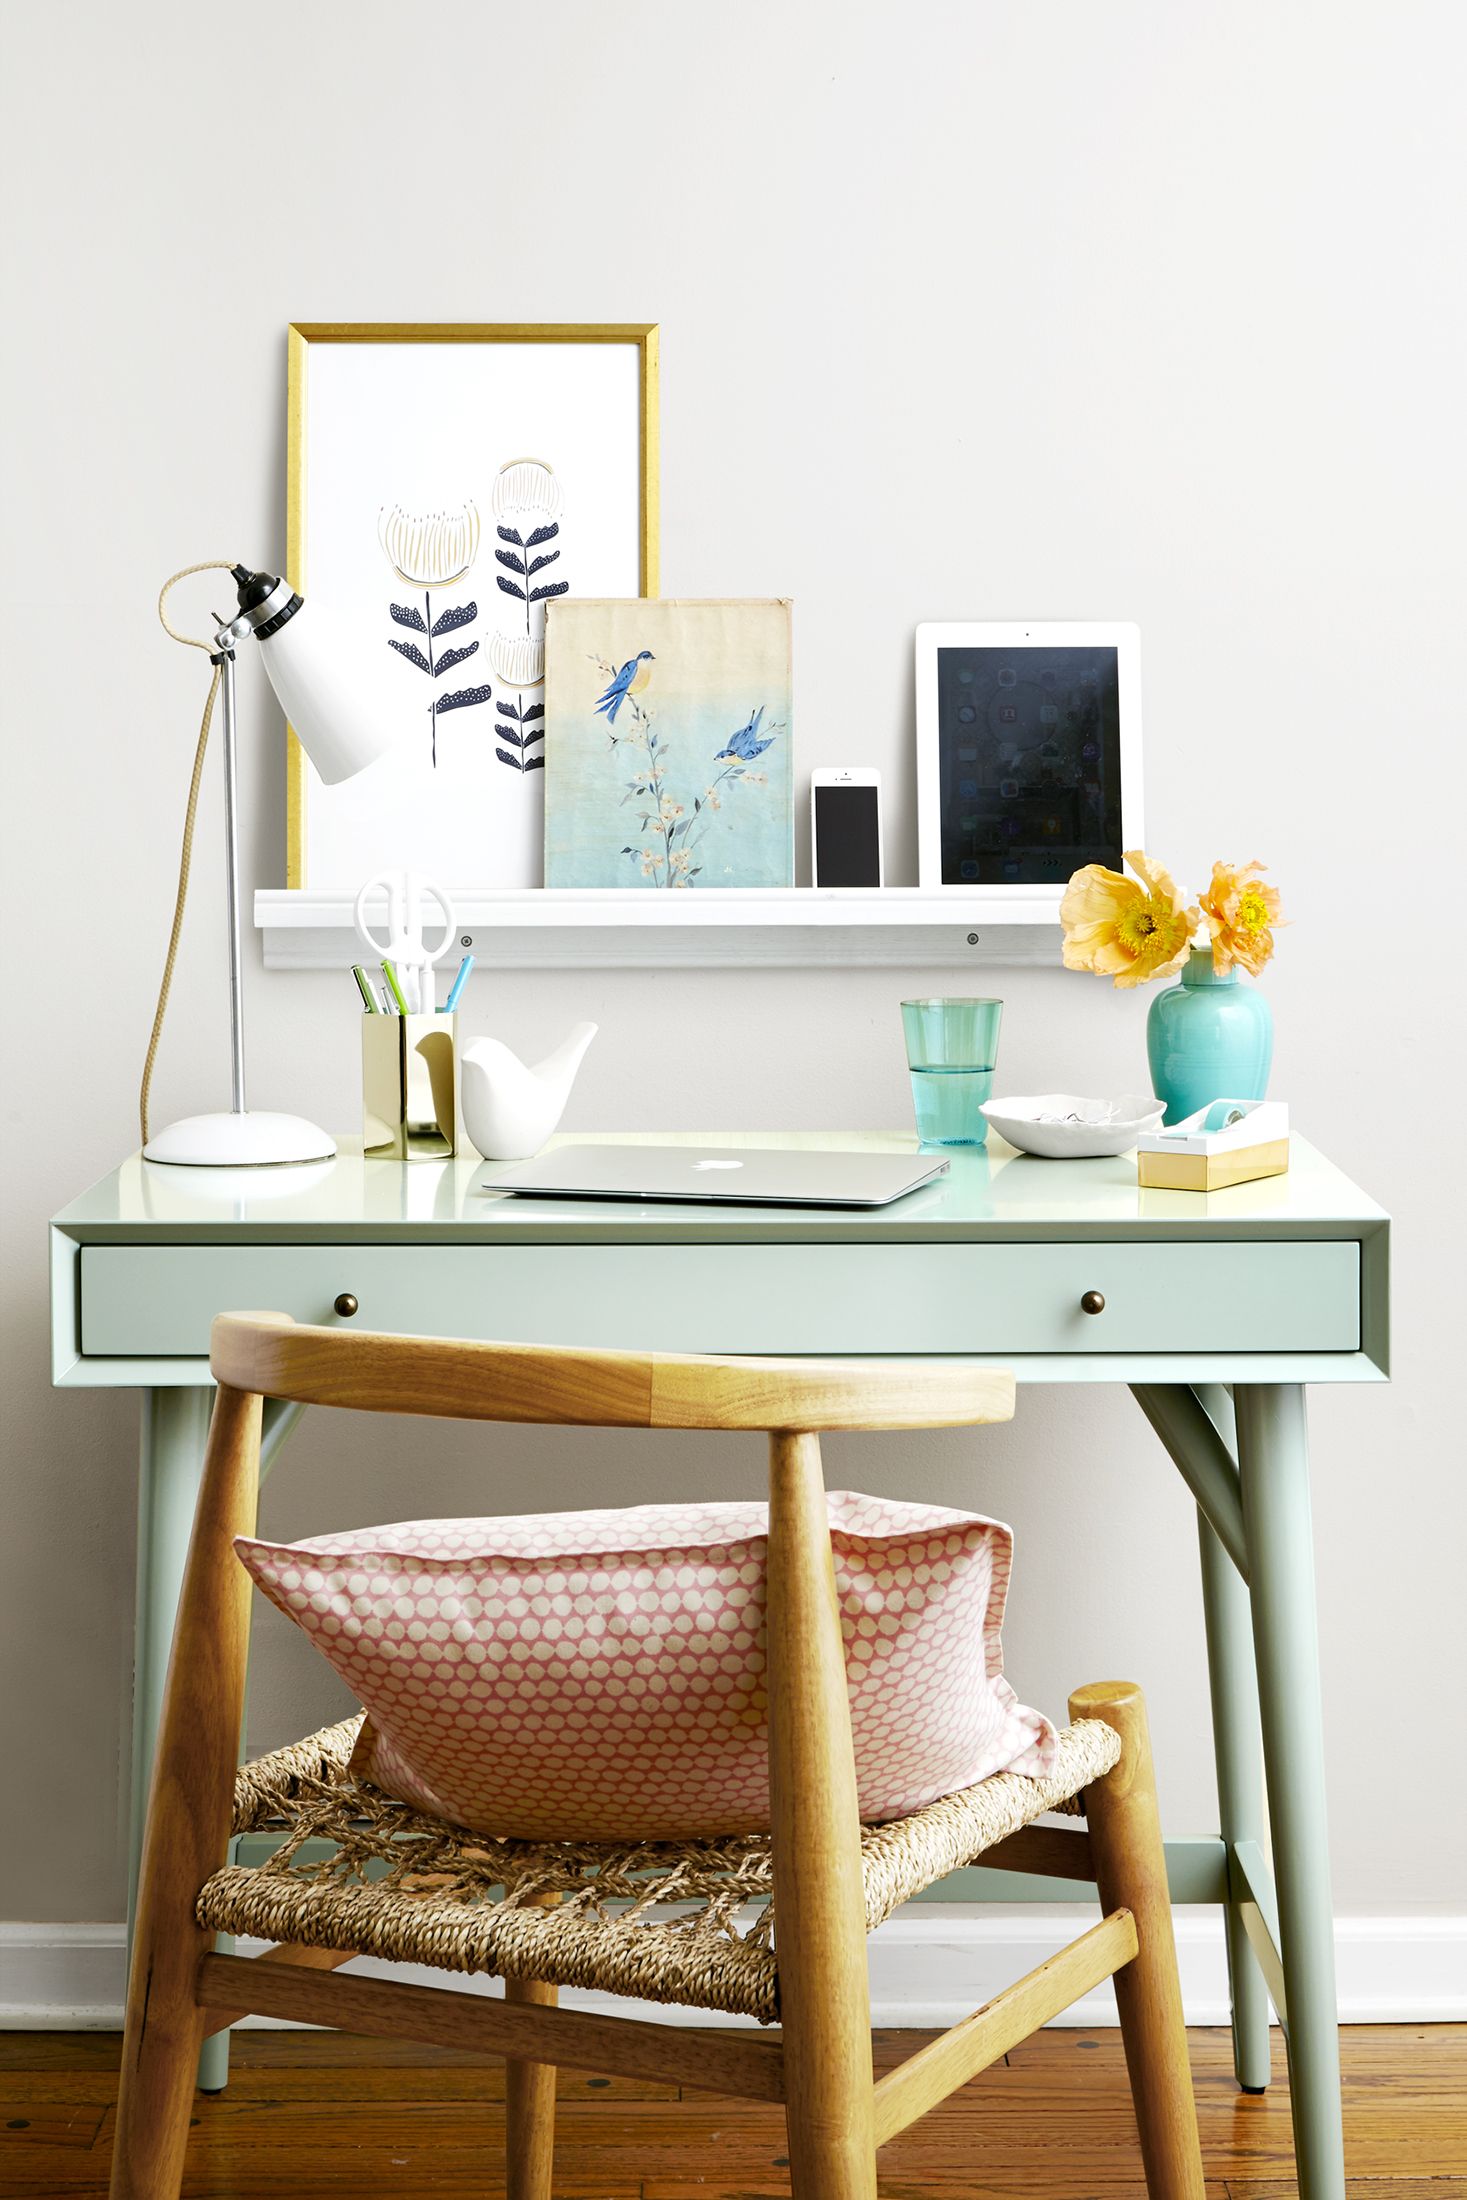 Decorating A Home Office - Home Office Decorating Tips : From affordable decor to modern diys, try these inspiring workspace setups.